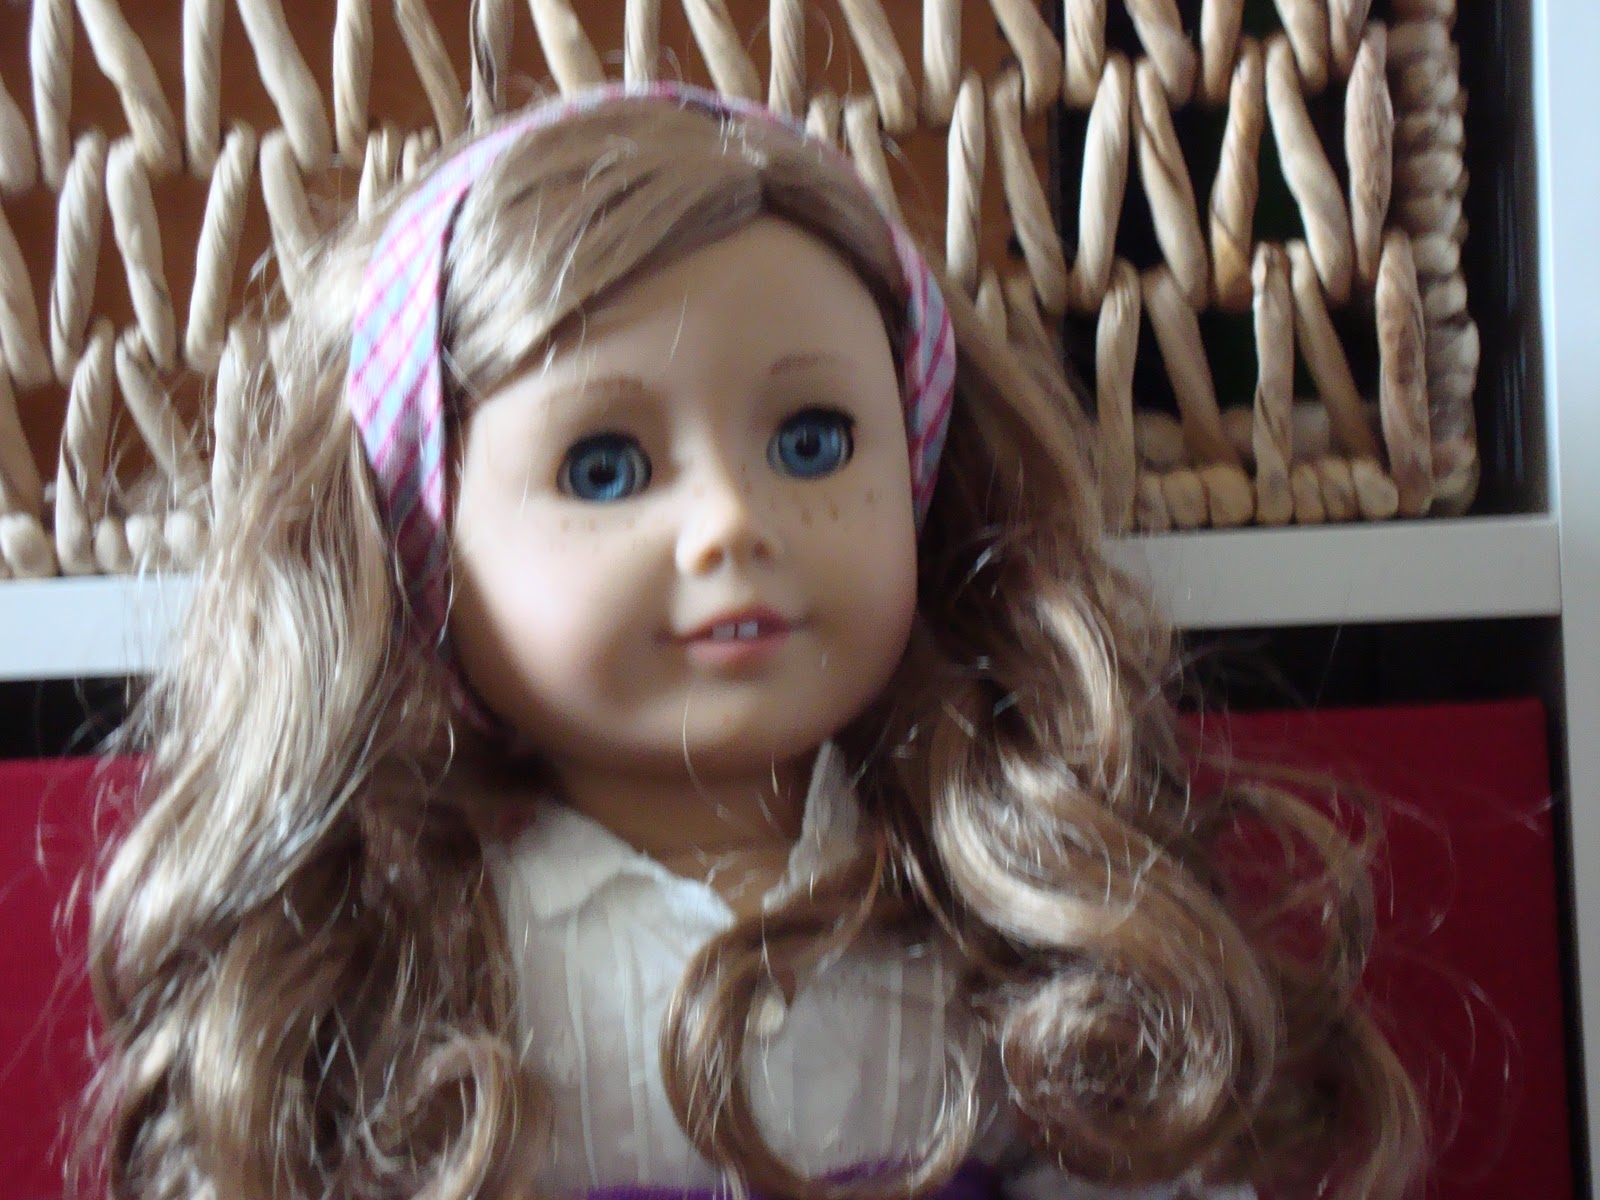 American Girl Doll with Curly Hair and Blue Eyes - wide 6